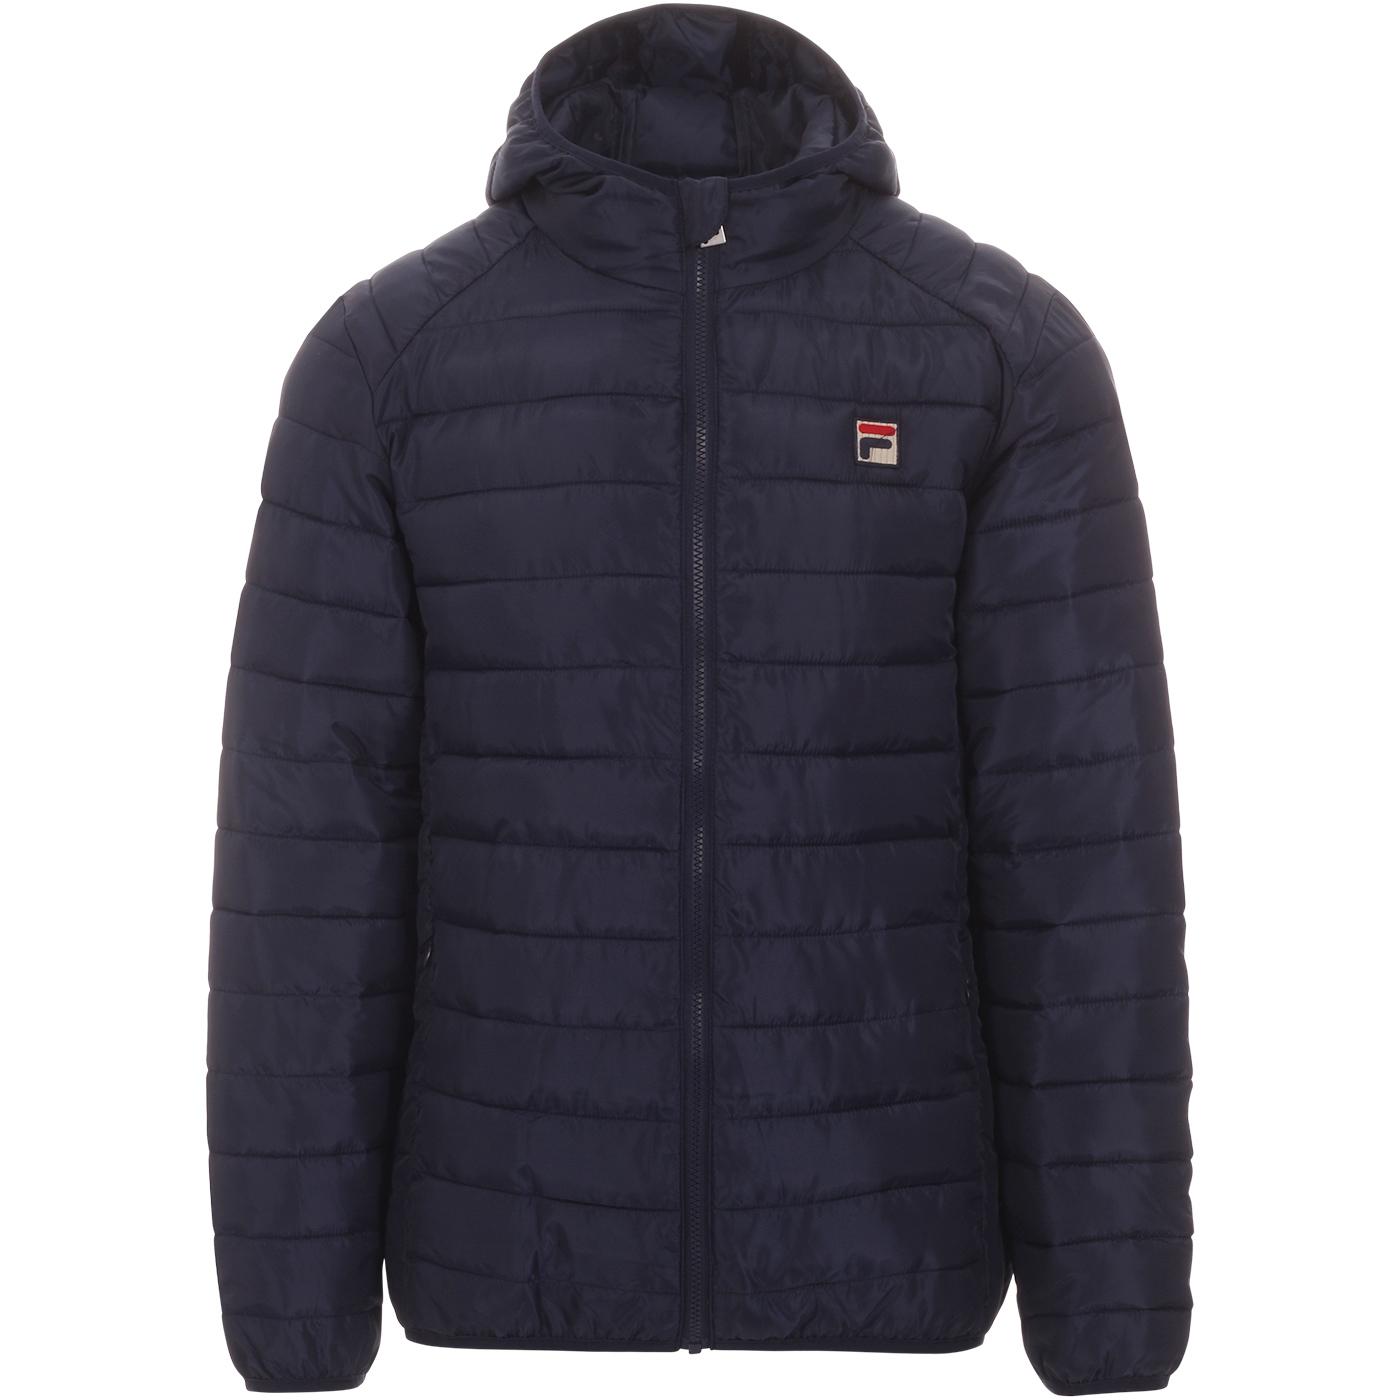 FILA VINTAGE Pavo Retro 90s Quilted Puffer Jacket in Peacoat